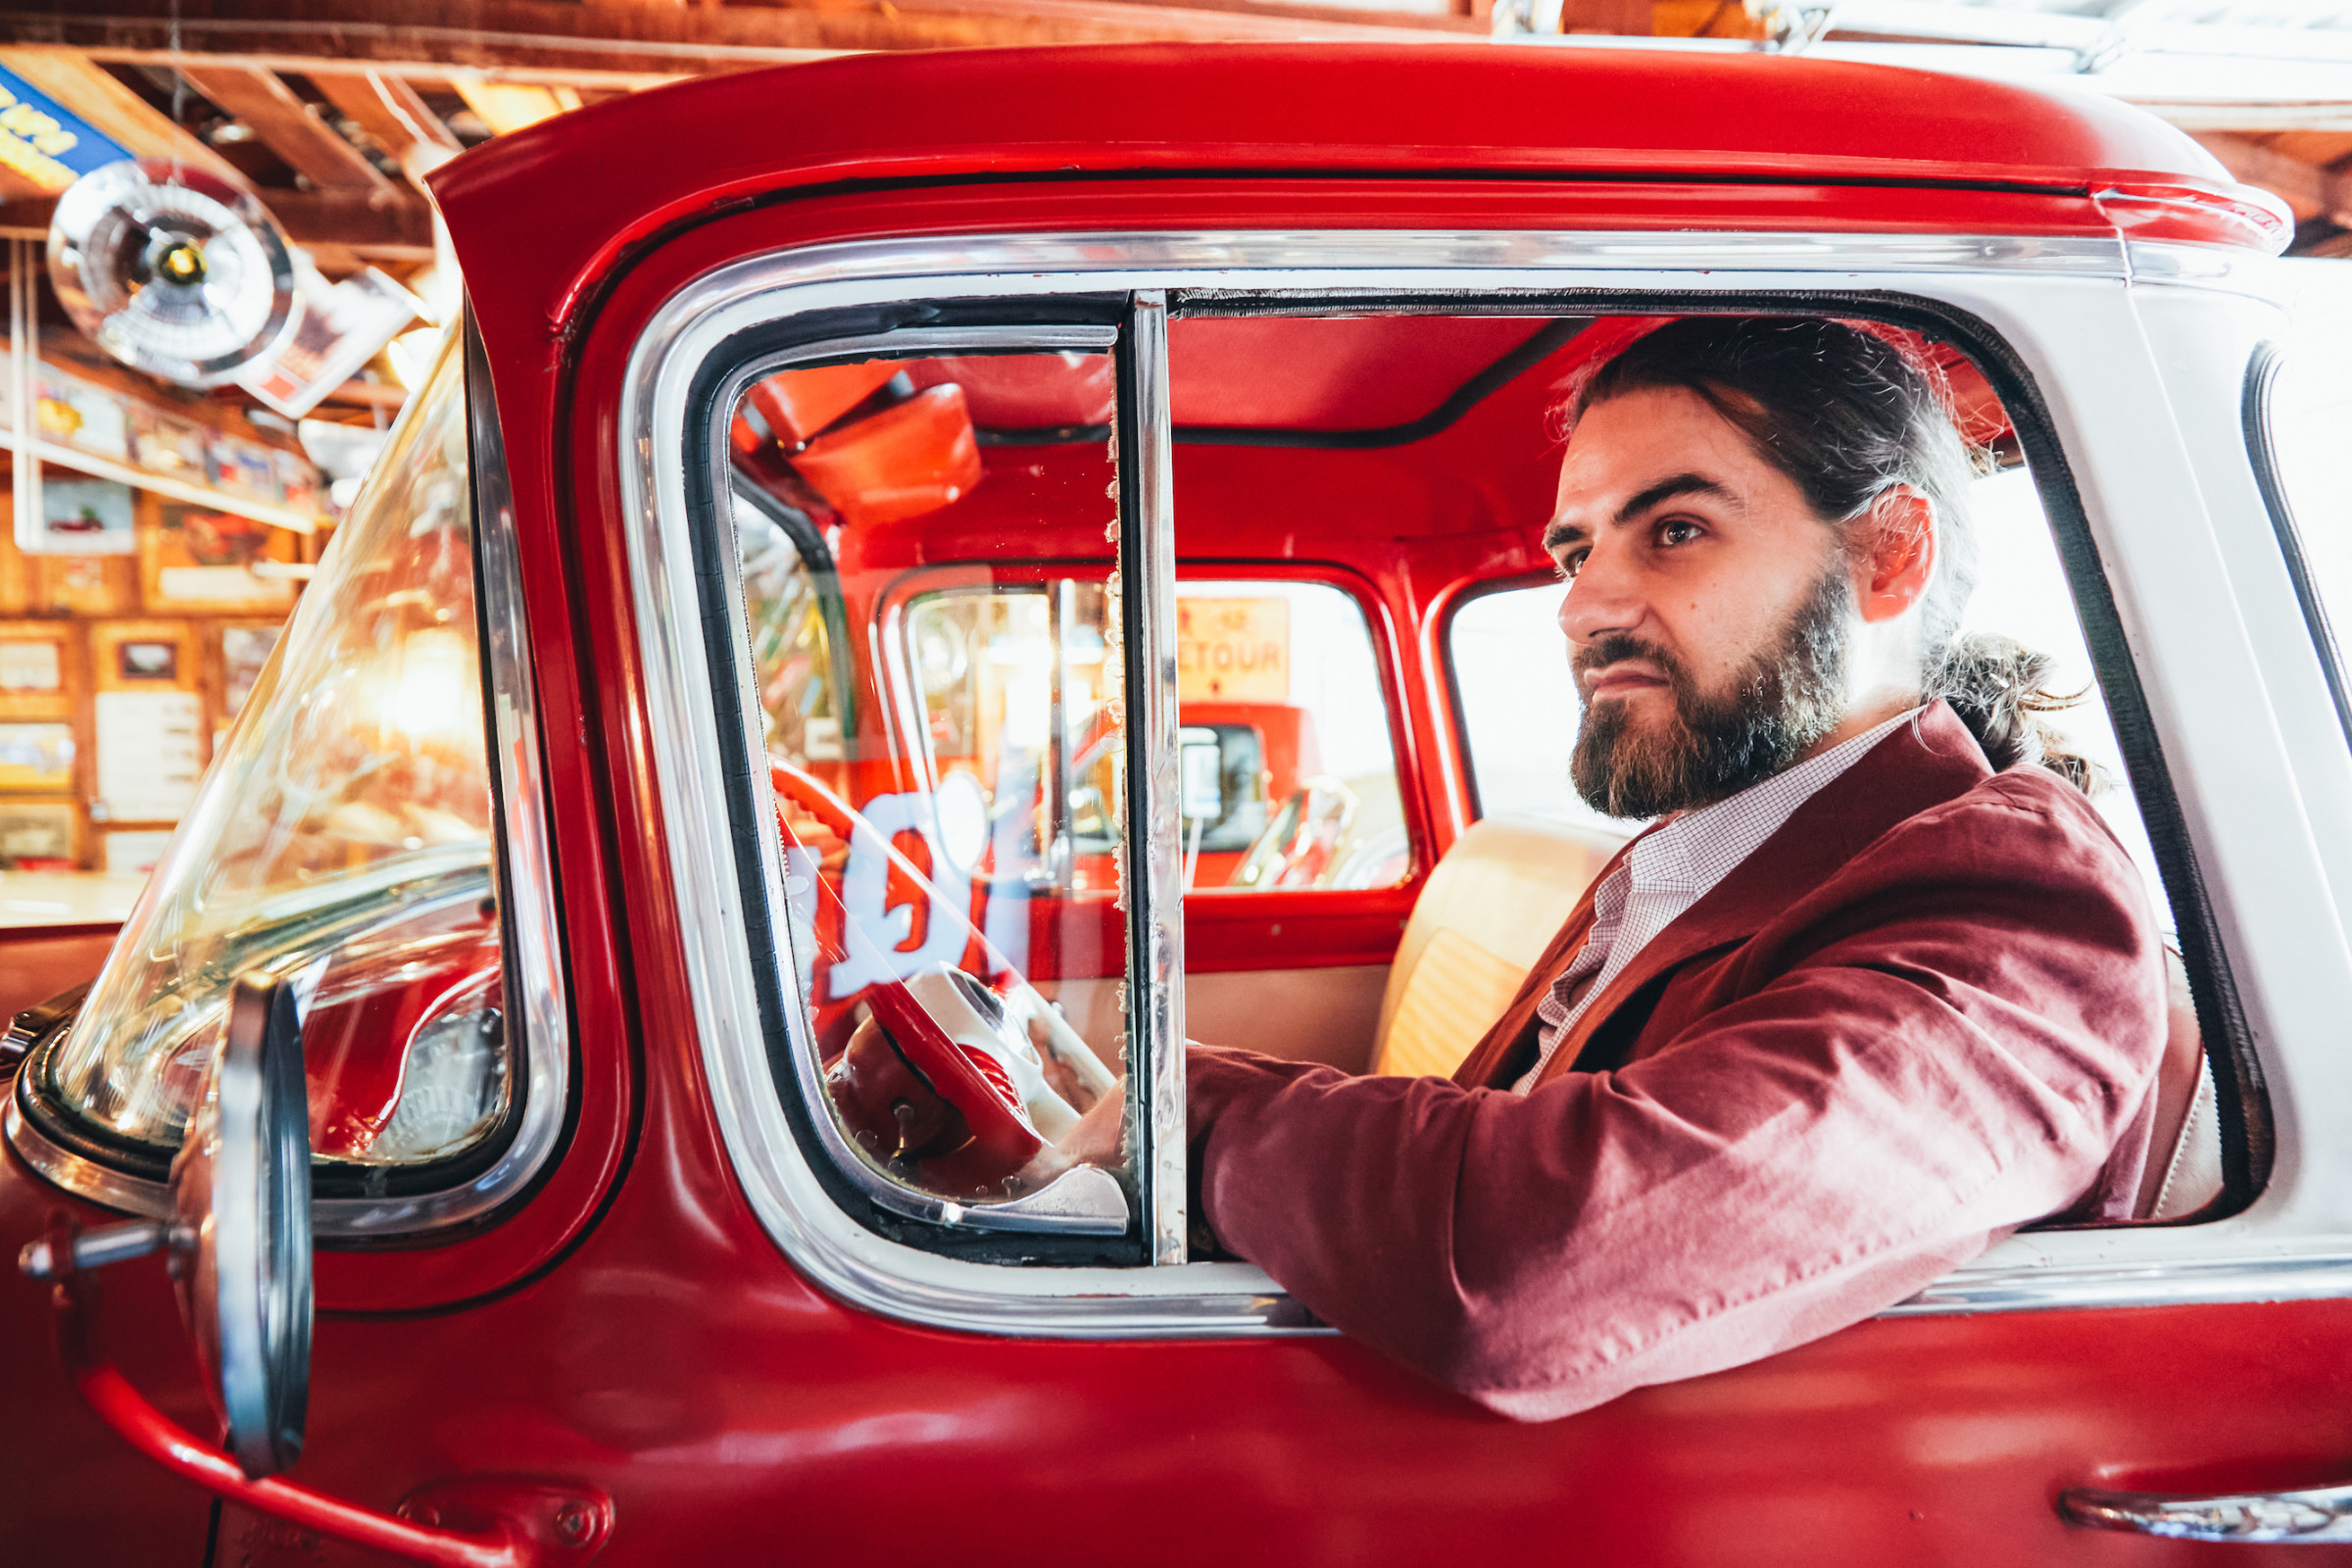 Author Mahmoud sitting in the driver's seat of a red Chevy truck